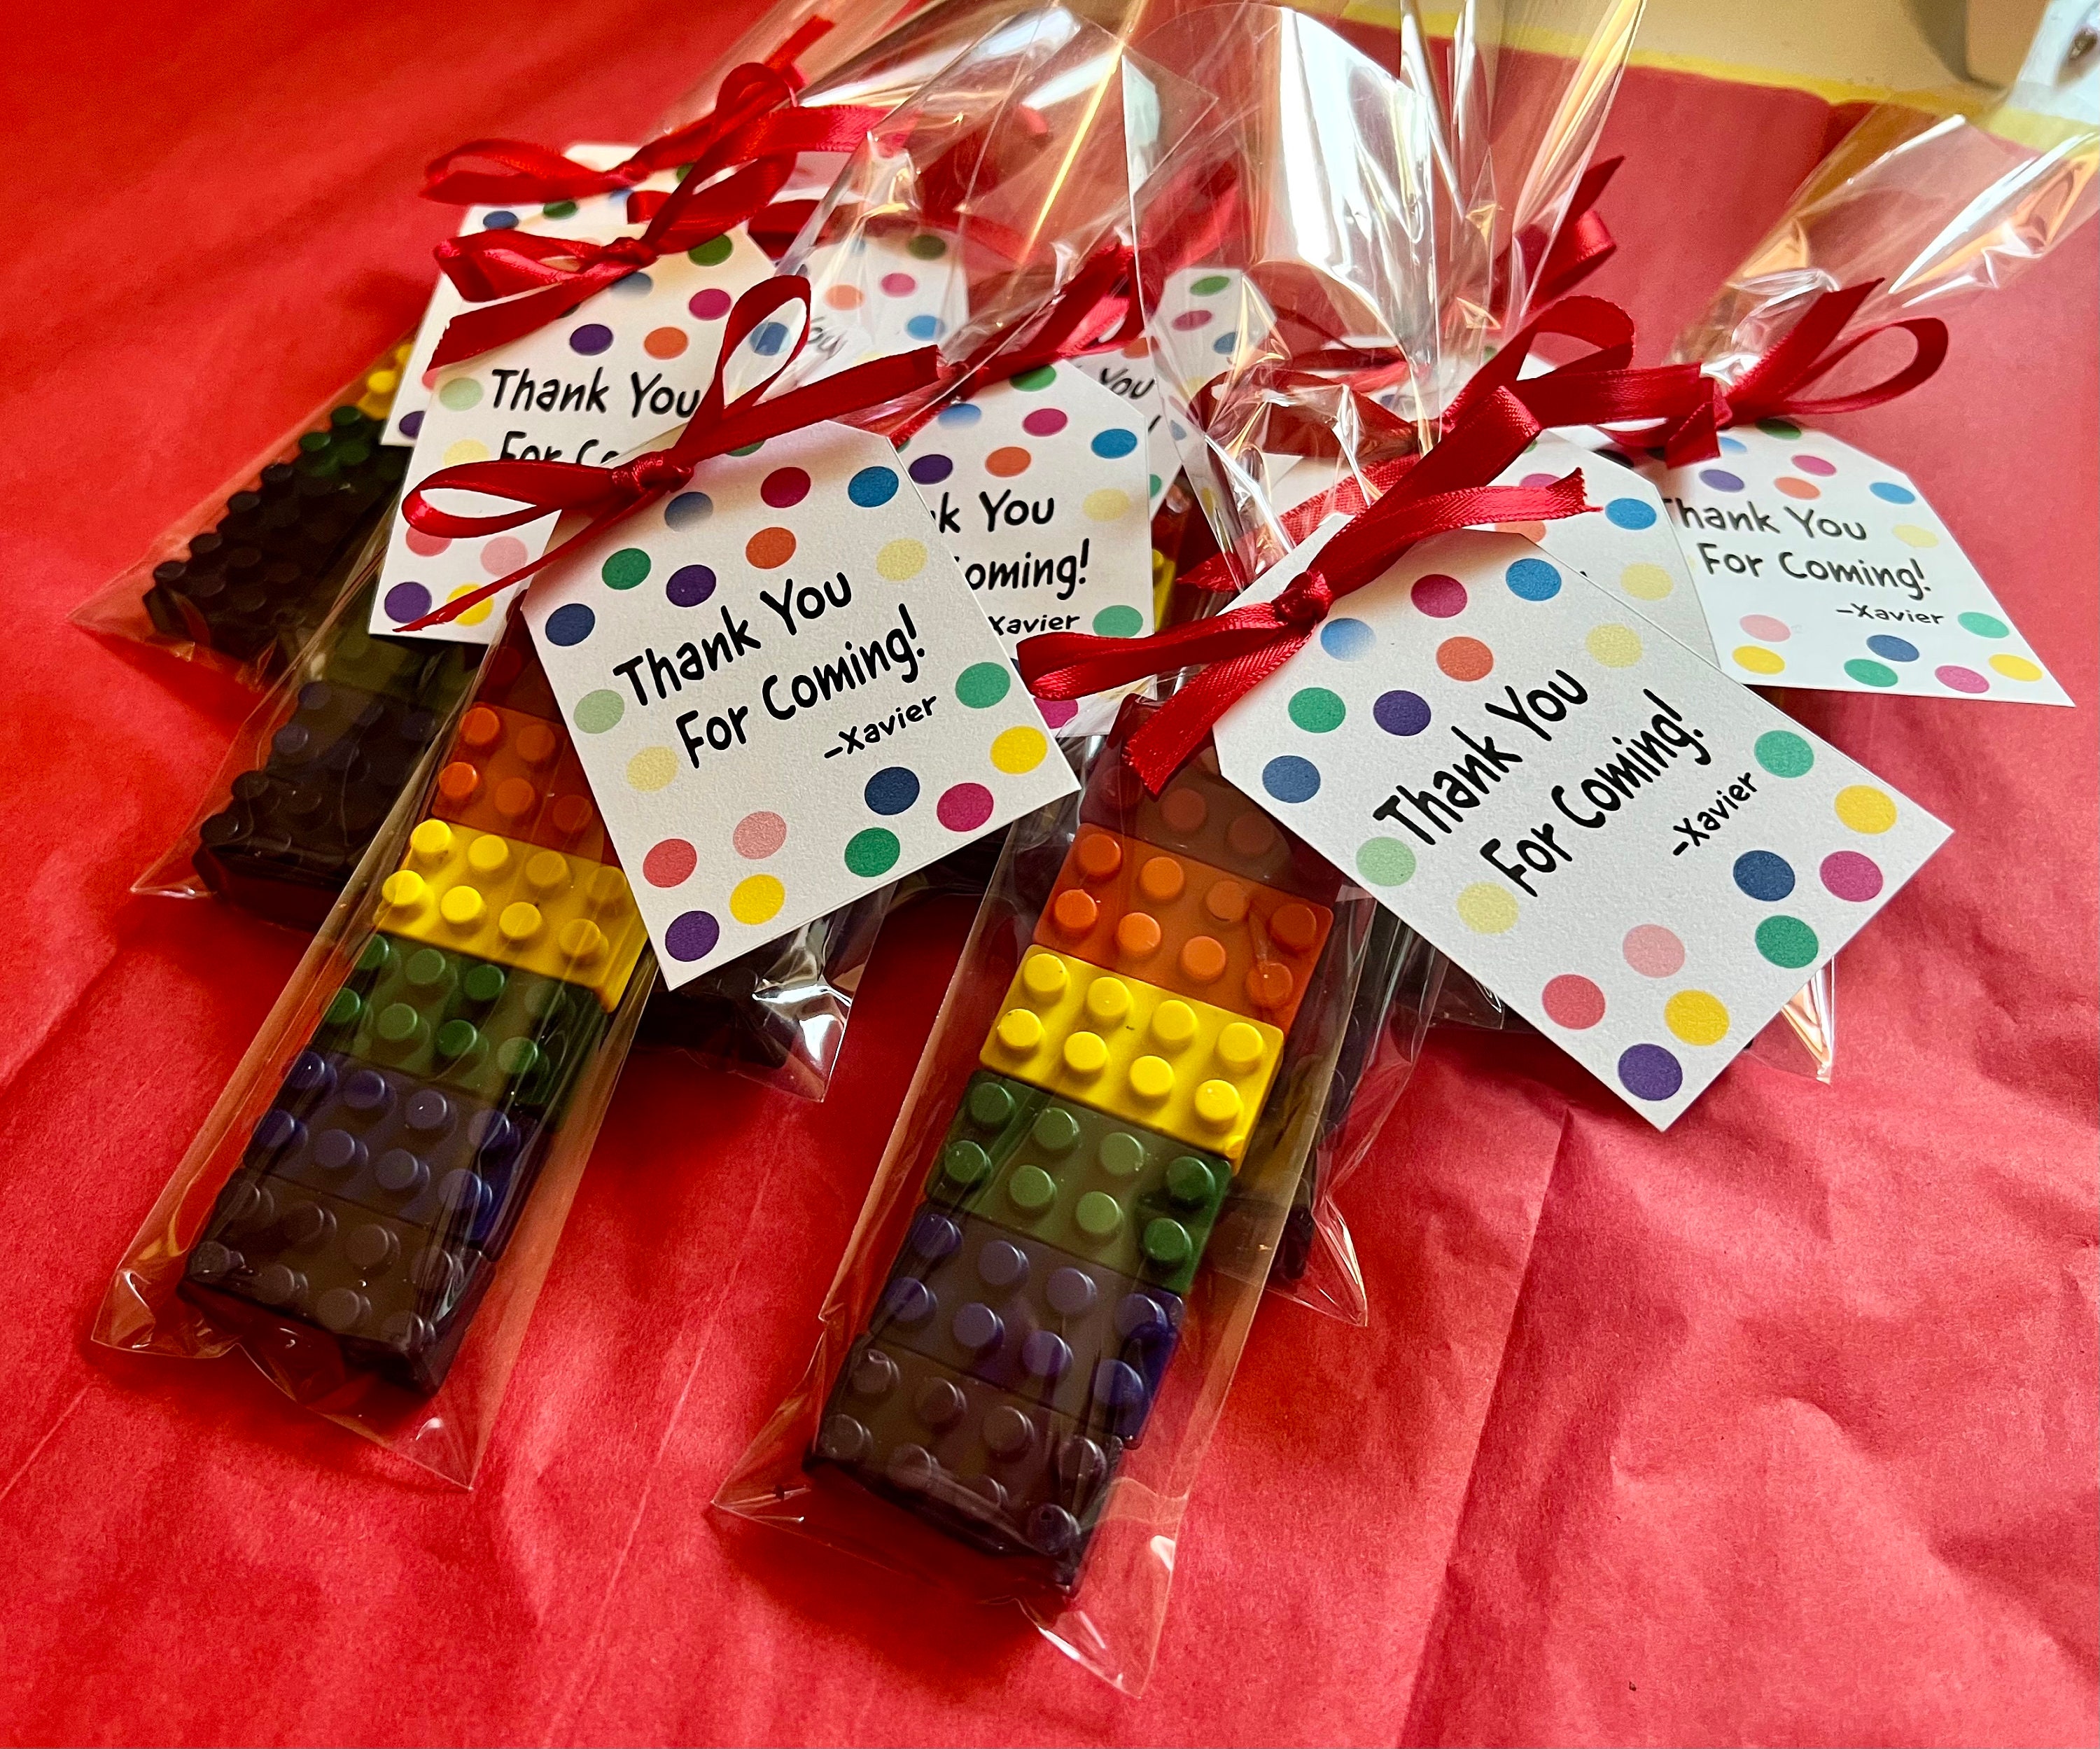 Giant Building Block Man Crayon Party Favours - includes colouring